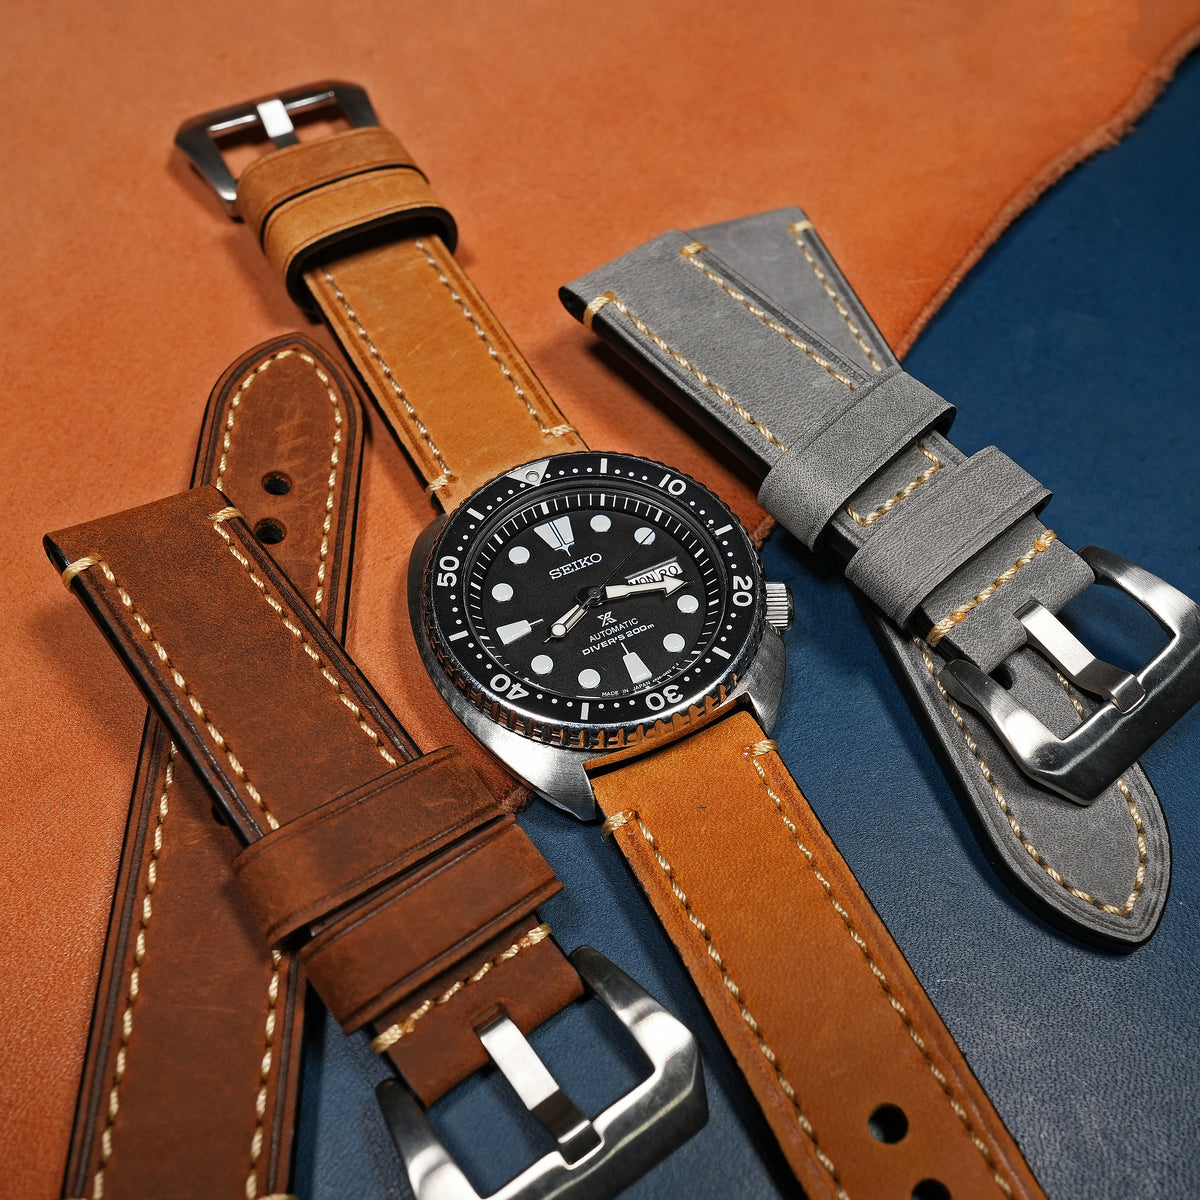 M1 Vintage Leather Watch Strap in Tan